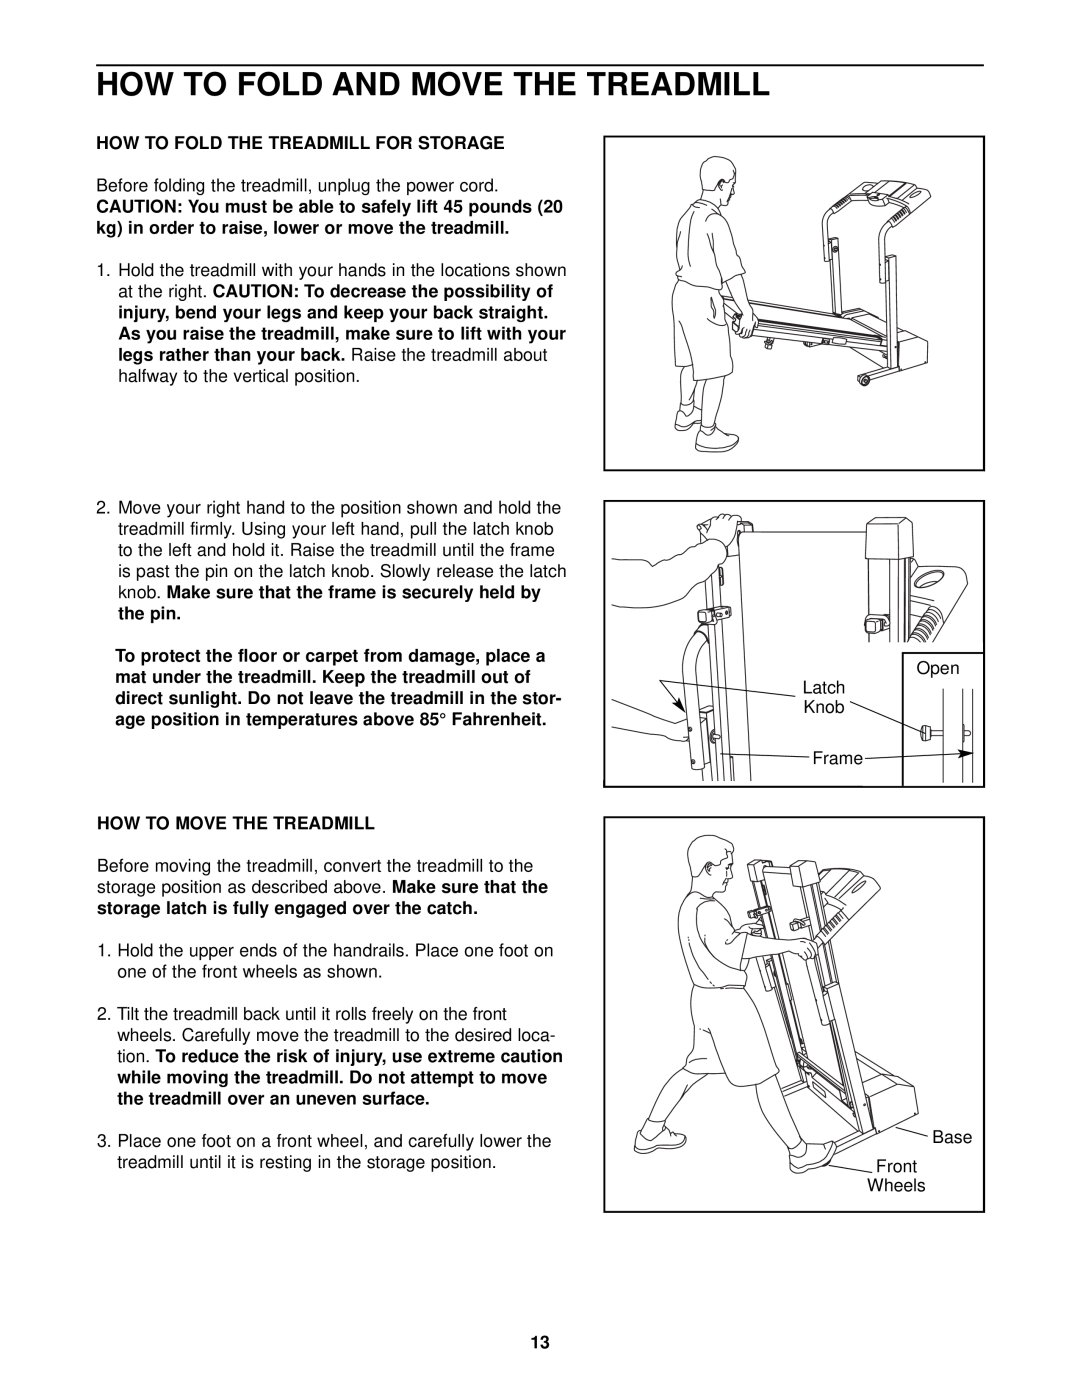 Weslo WLTL21130 How To Fold And Move The Treadmill, How To Fold The Treadmill For Storage, How To Move The Treadmill 